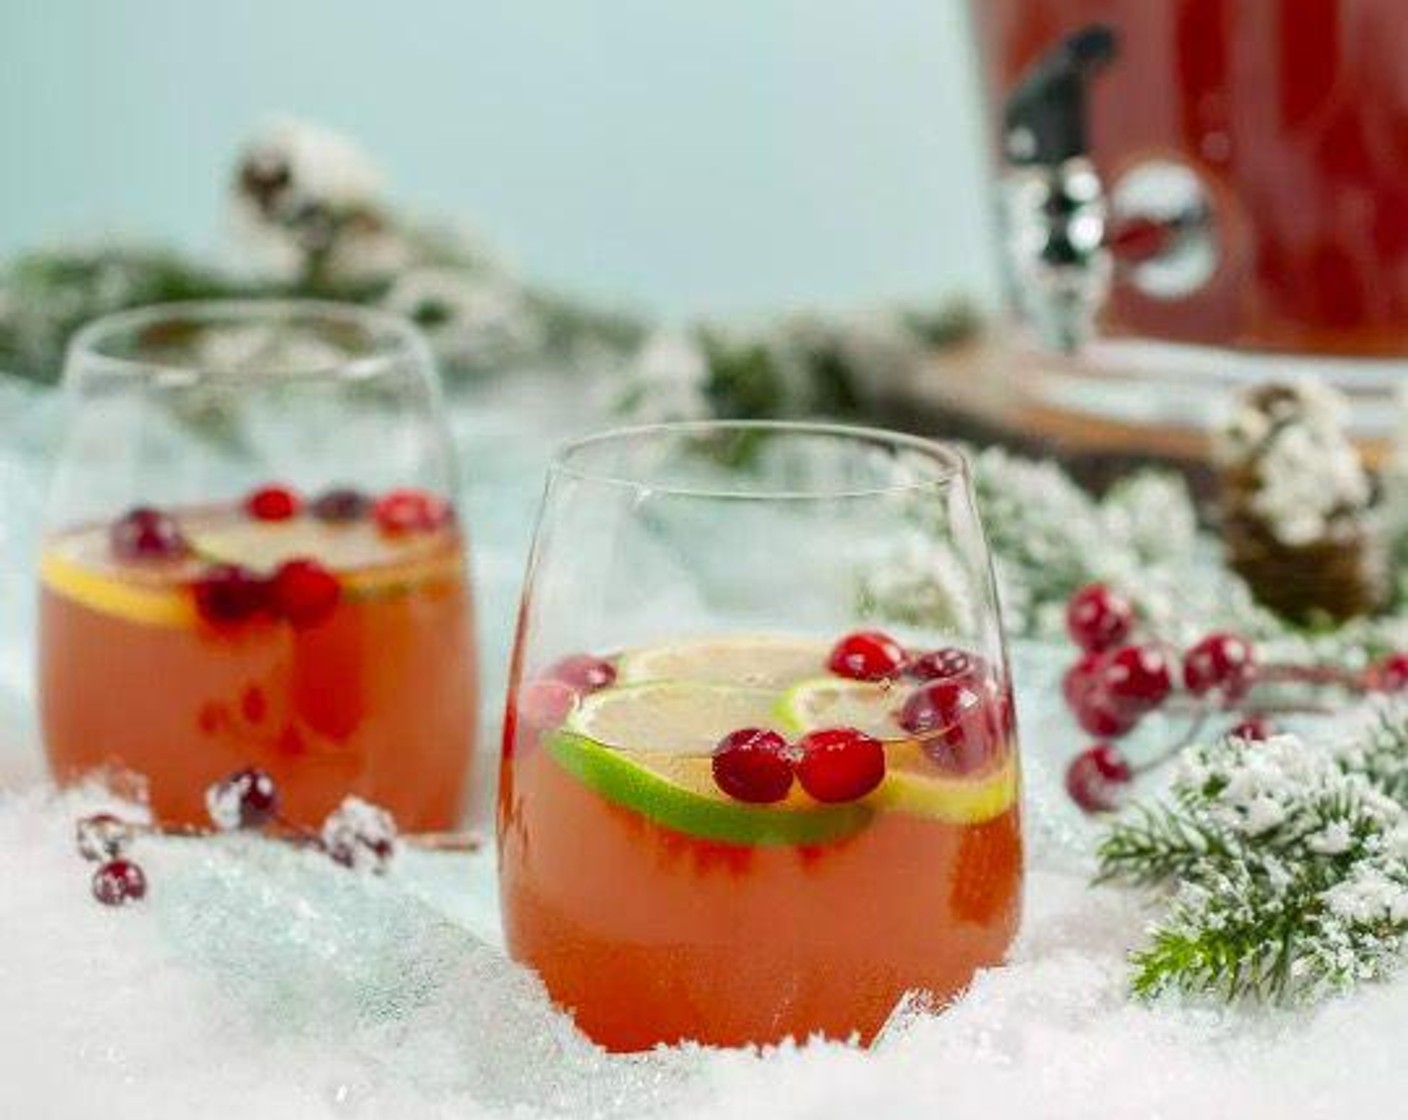 step 2 Add Cranberry Juice (4 cups), Unsweetened Pineapple Juice (4 cups), and Ginger Ale (16 2/3 cups) to a large punch bowl or beverage dispenser with a spigot. Stir to combine and top with cut fruit and Fresh Cranberry (1 cup). Serve immediately.